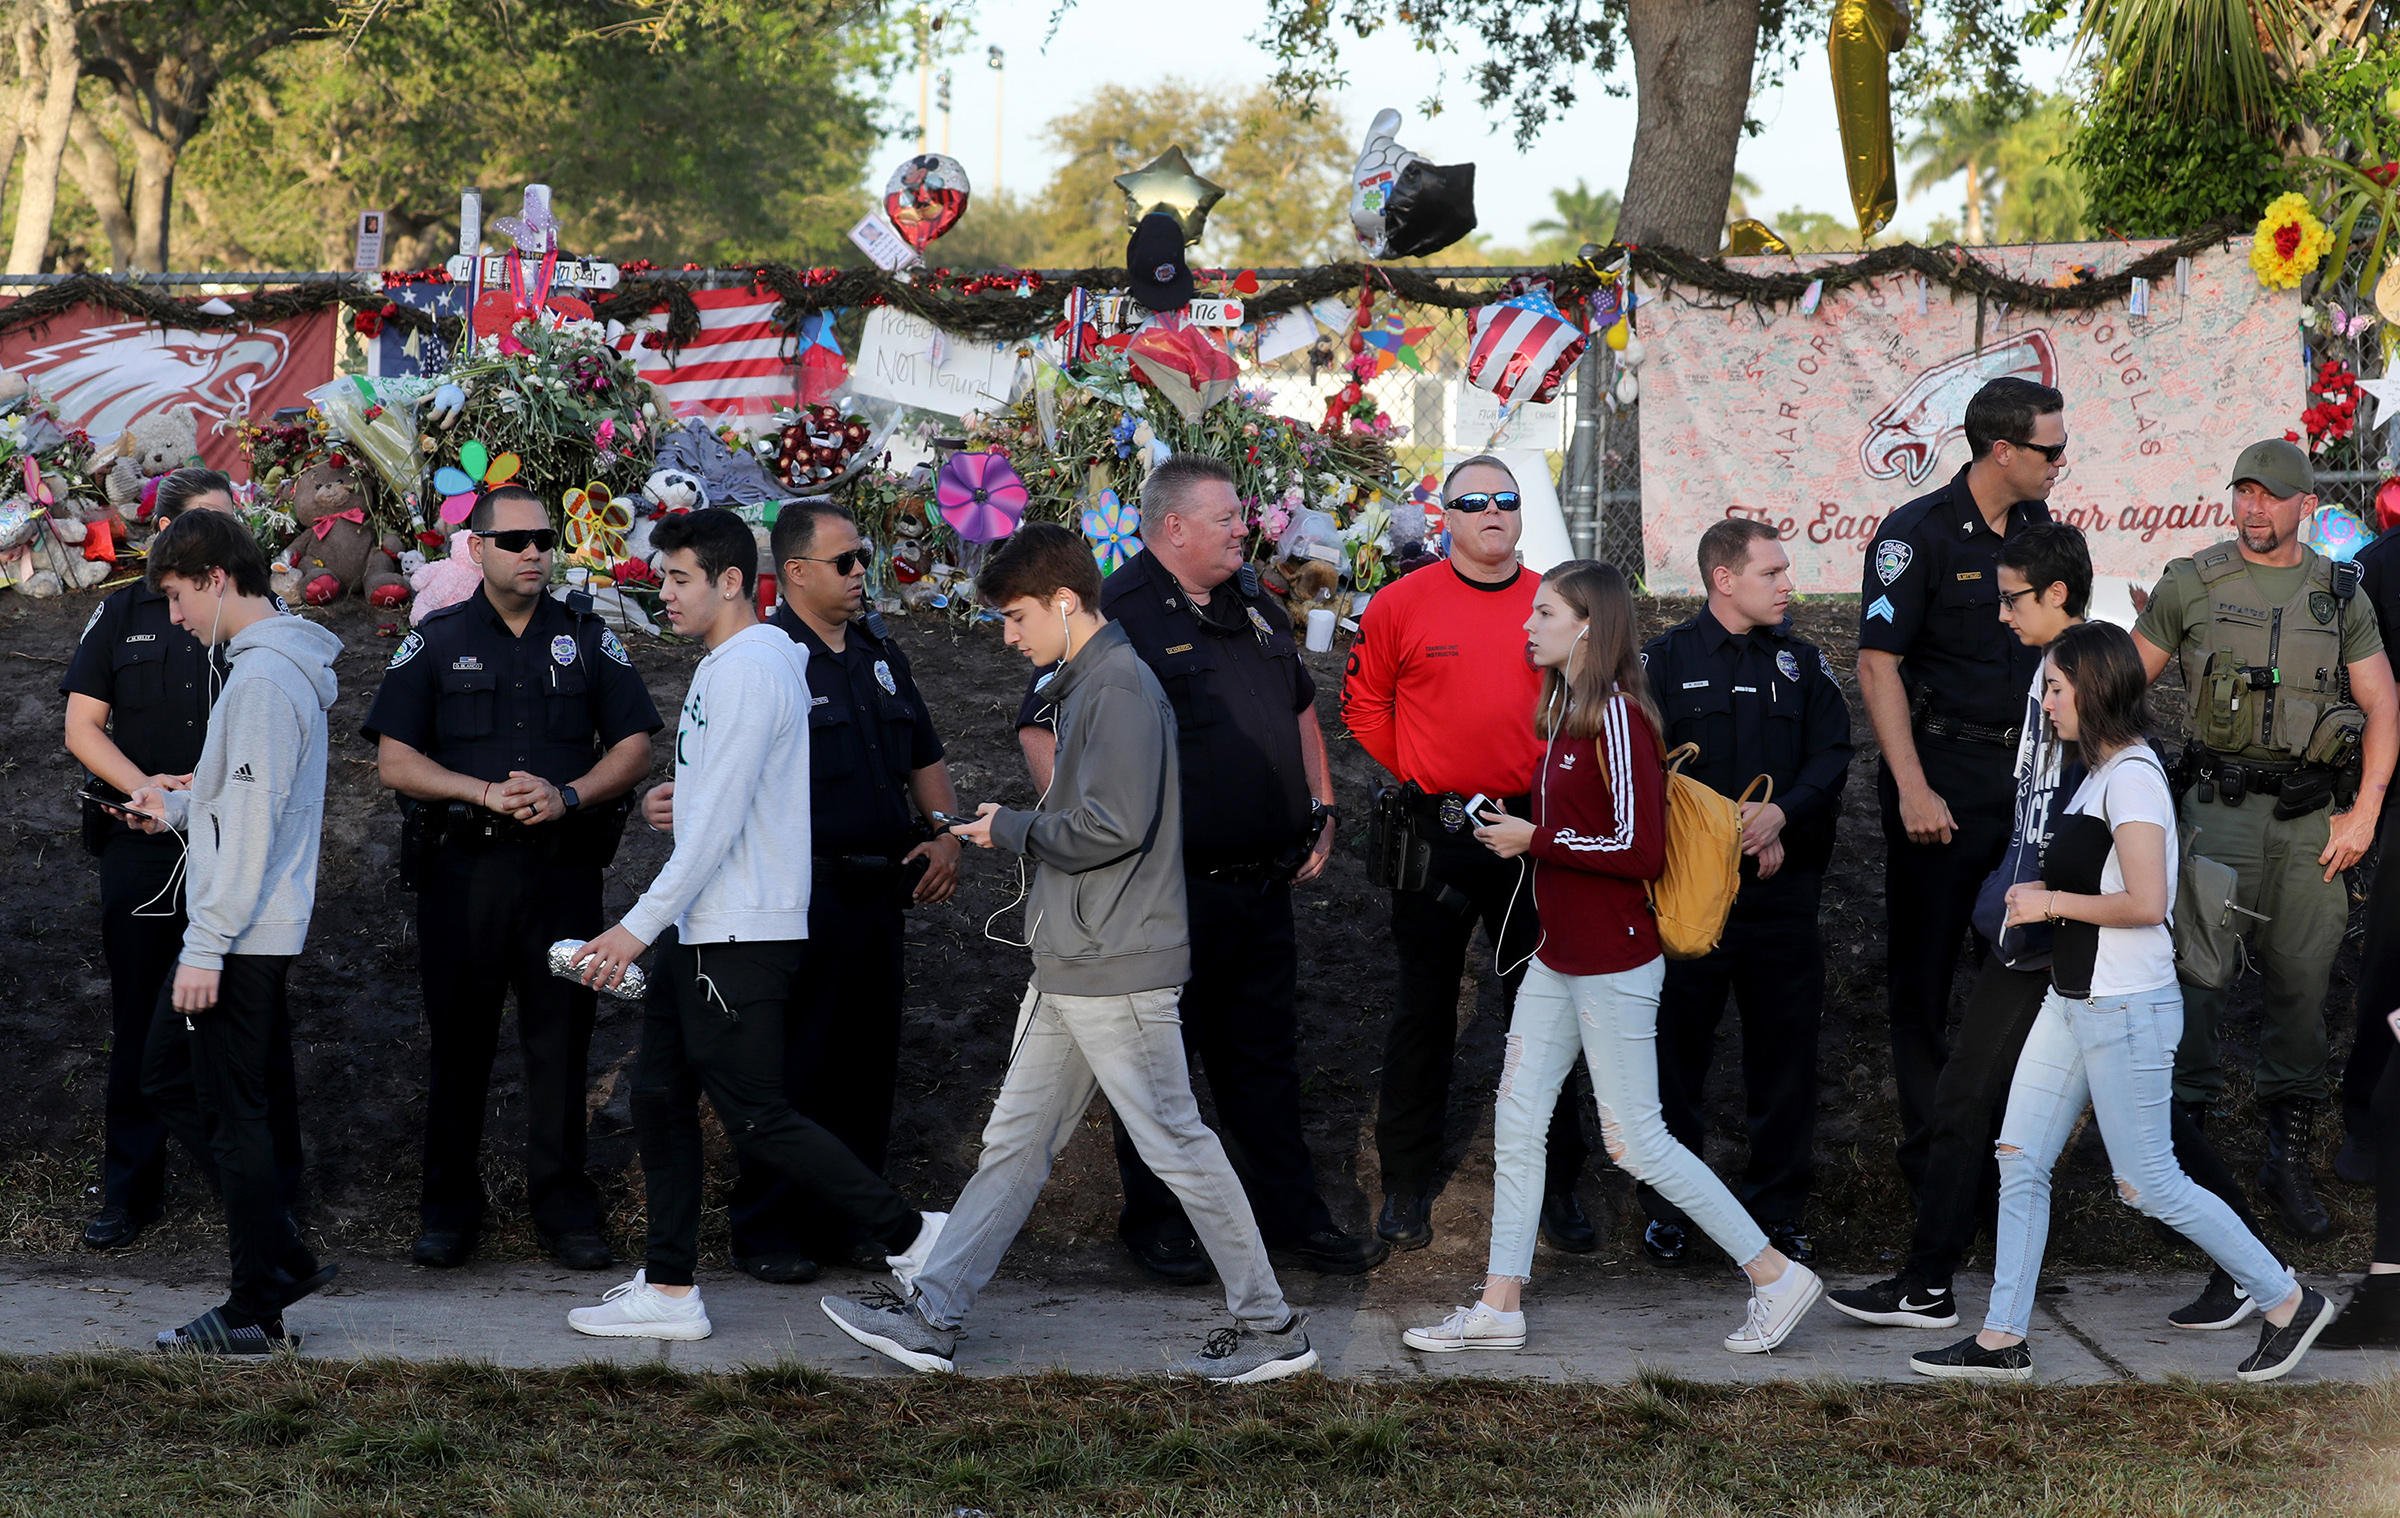 Students head back to school at Marjory Stoneman Douglas High School on Wednesday, Feb. 28, 2018 for the first time after a gunman killed 17 students in the school on Valentine's Day. (Mike Stocker—Sun Sentinel/TNS/Sipa USA)